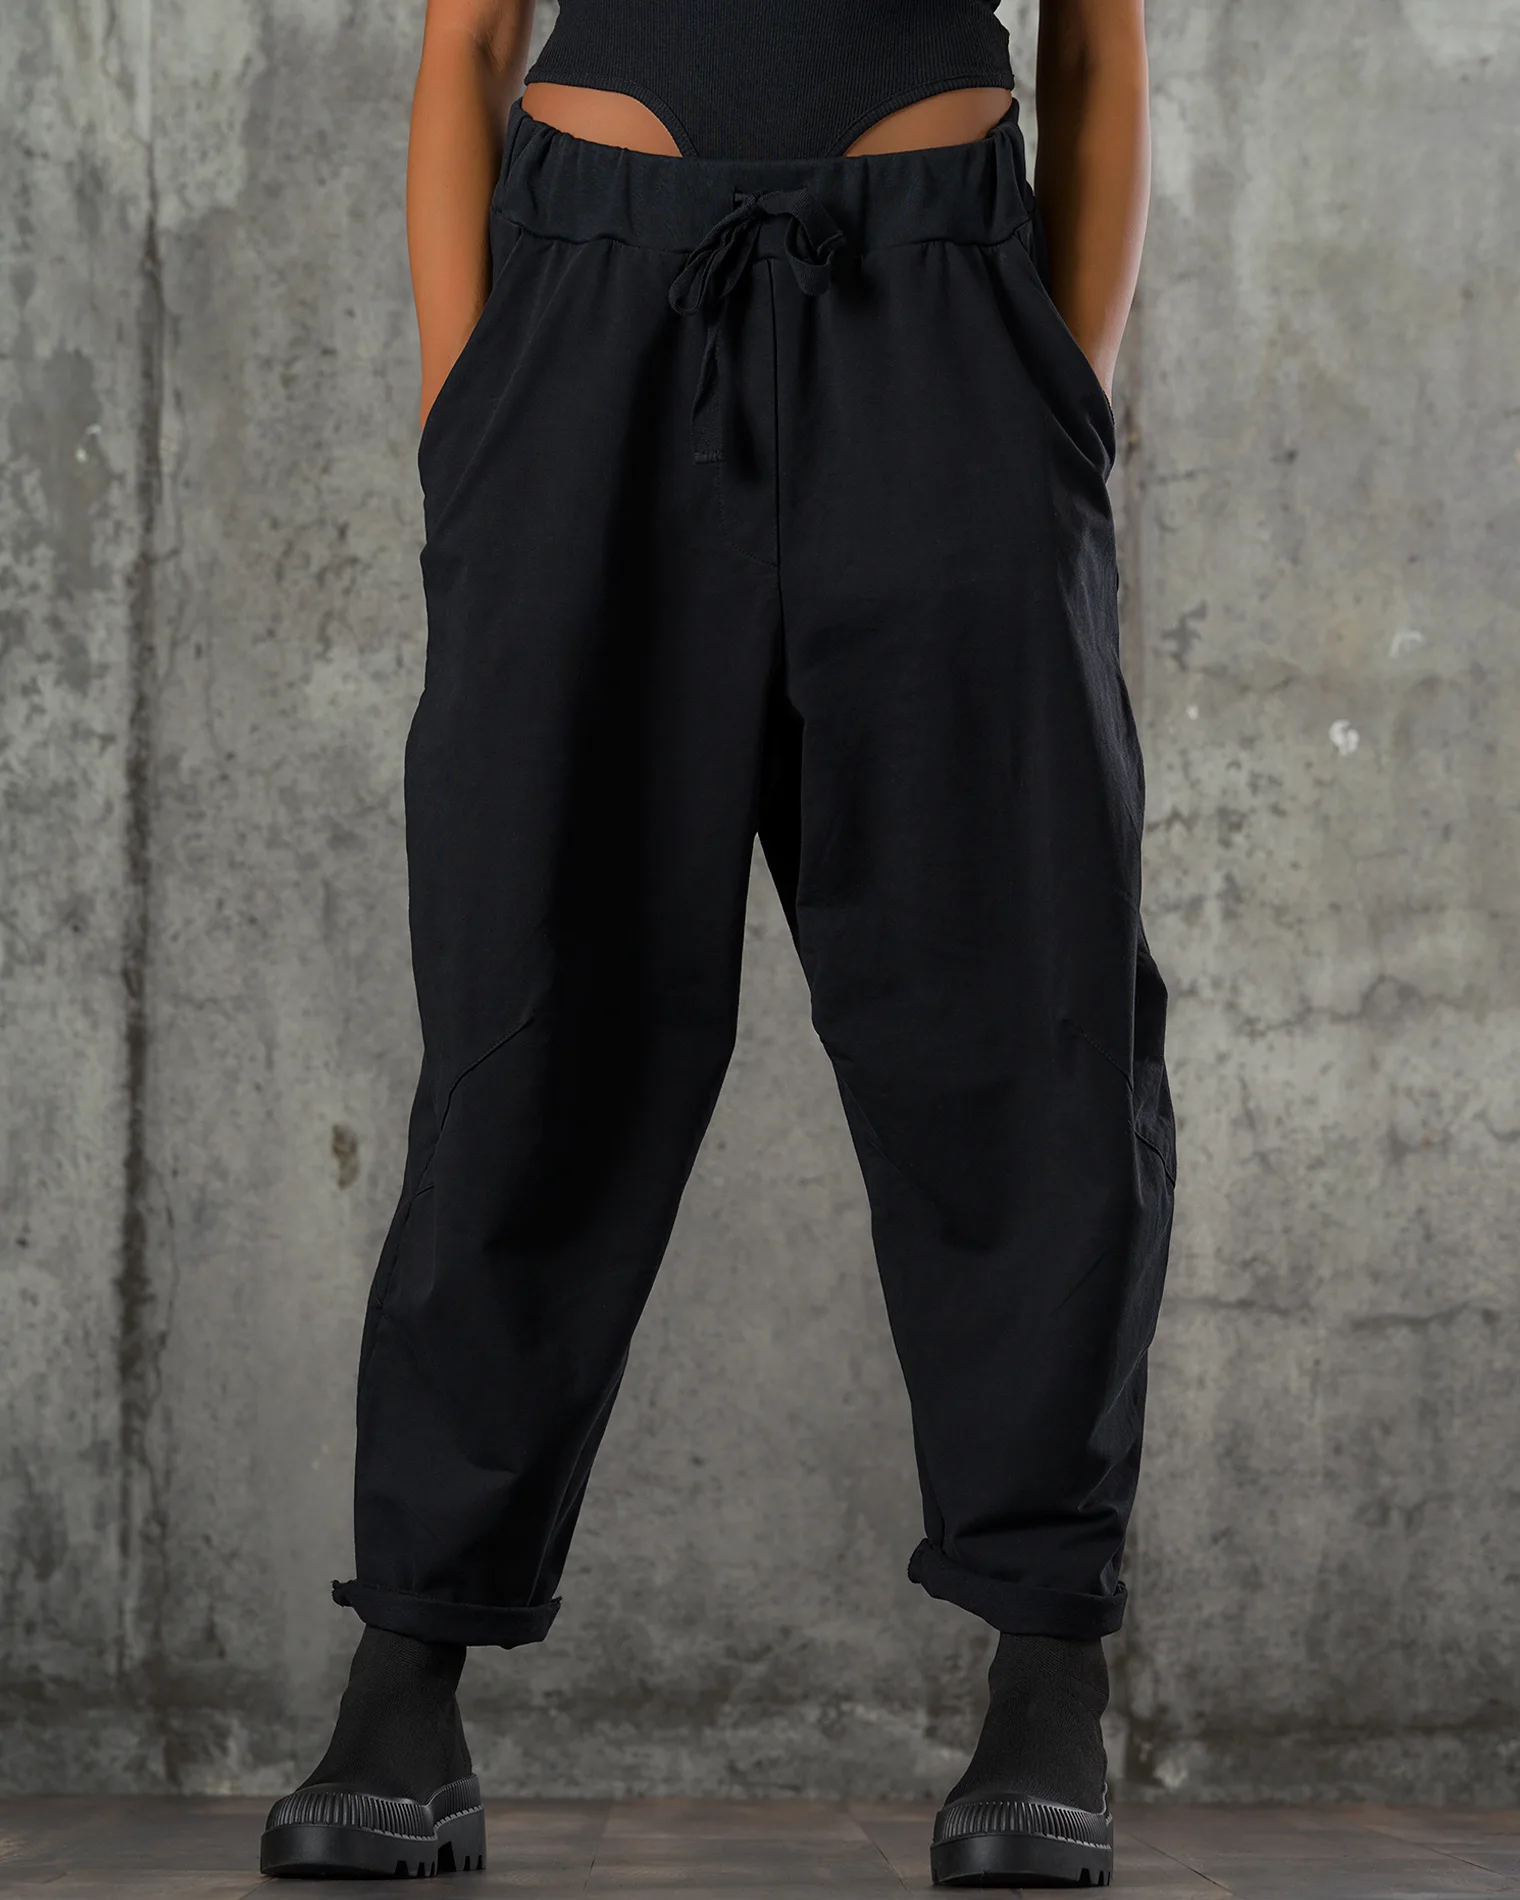 Rising Trousers, Black Color